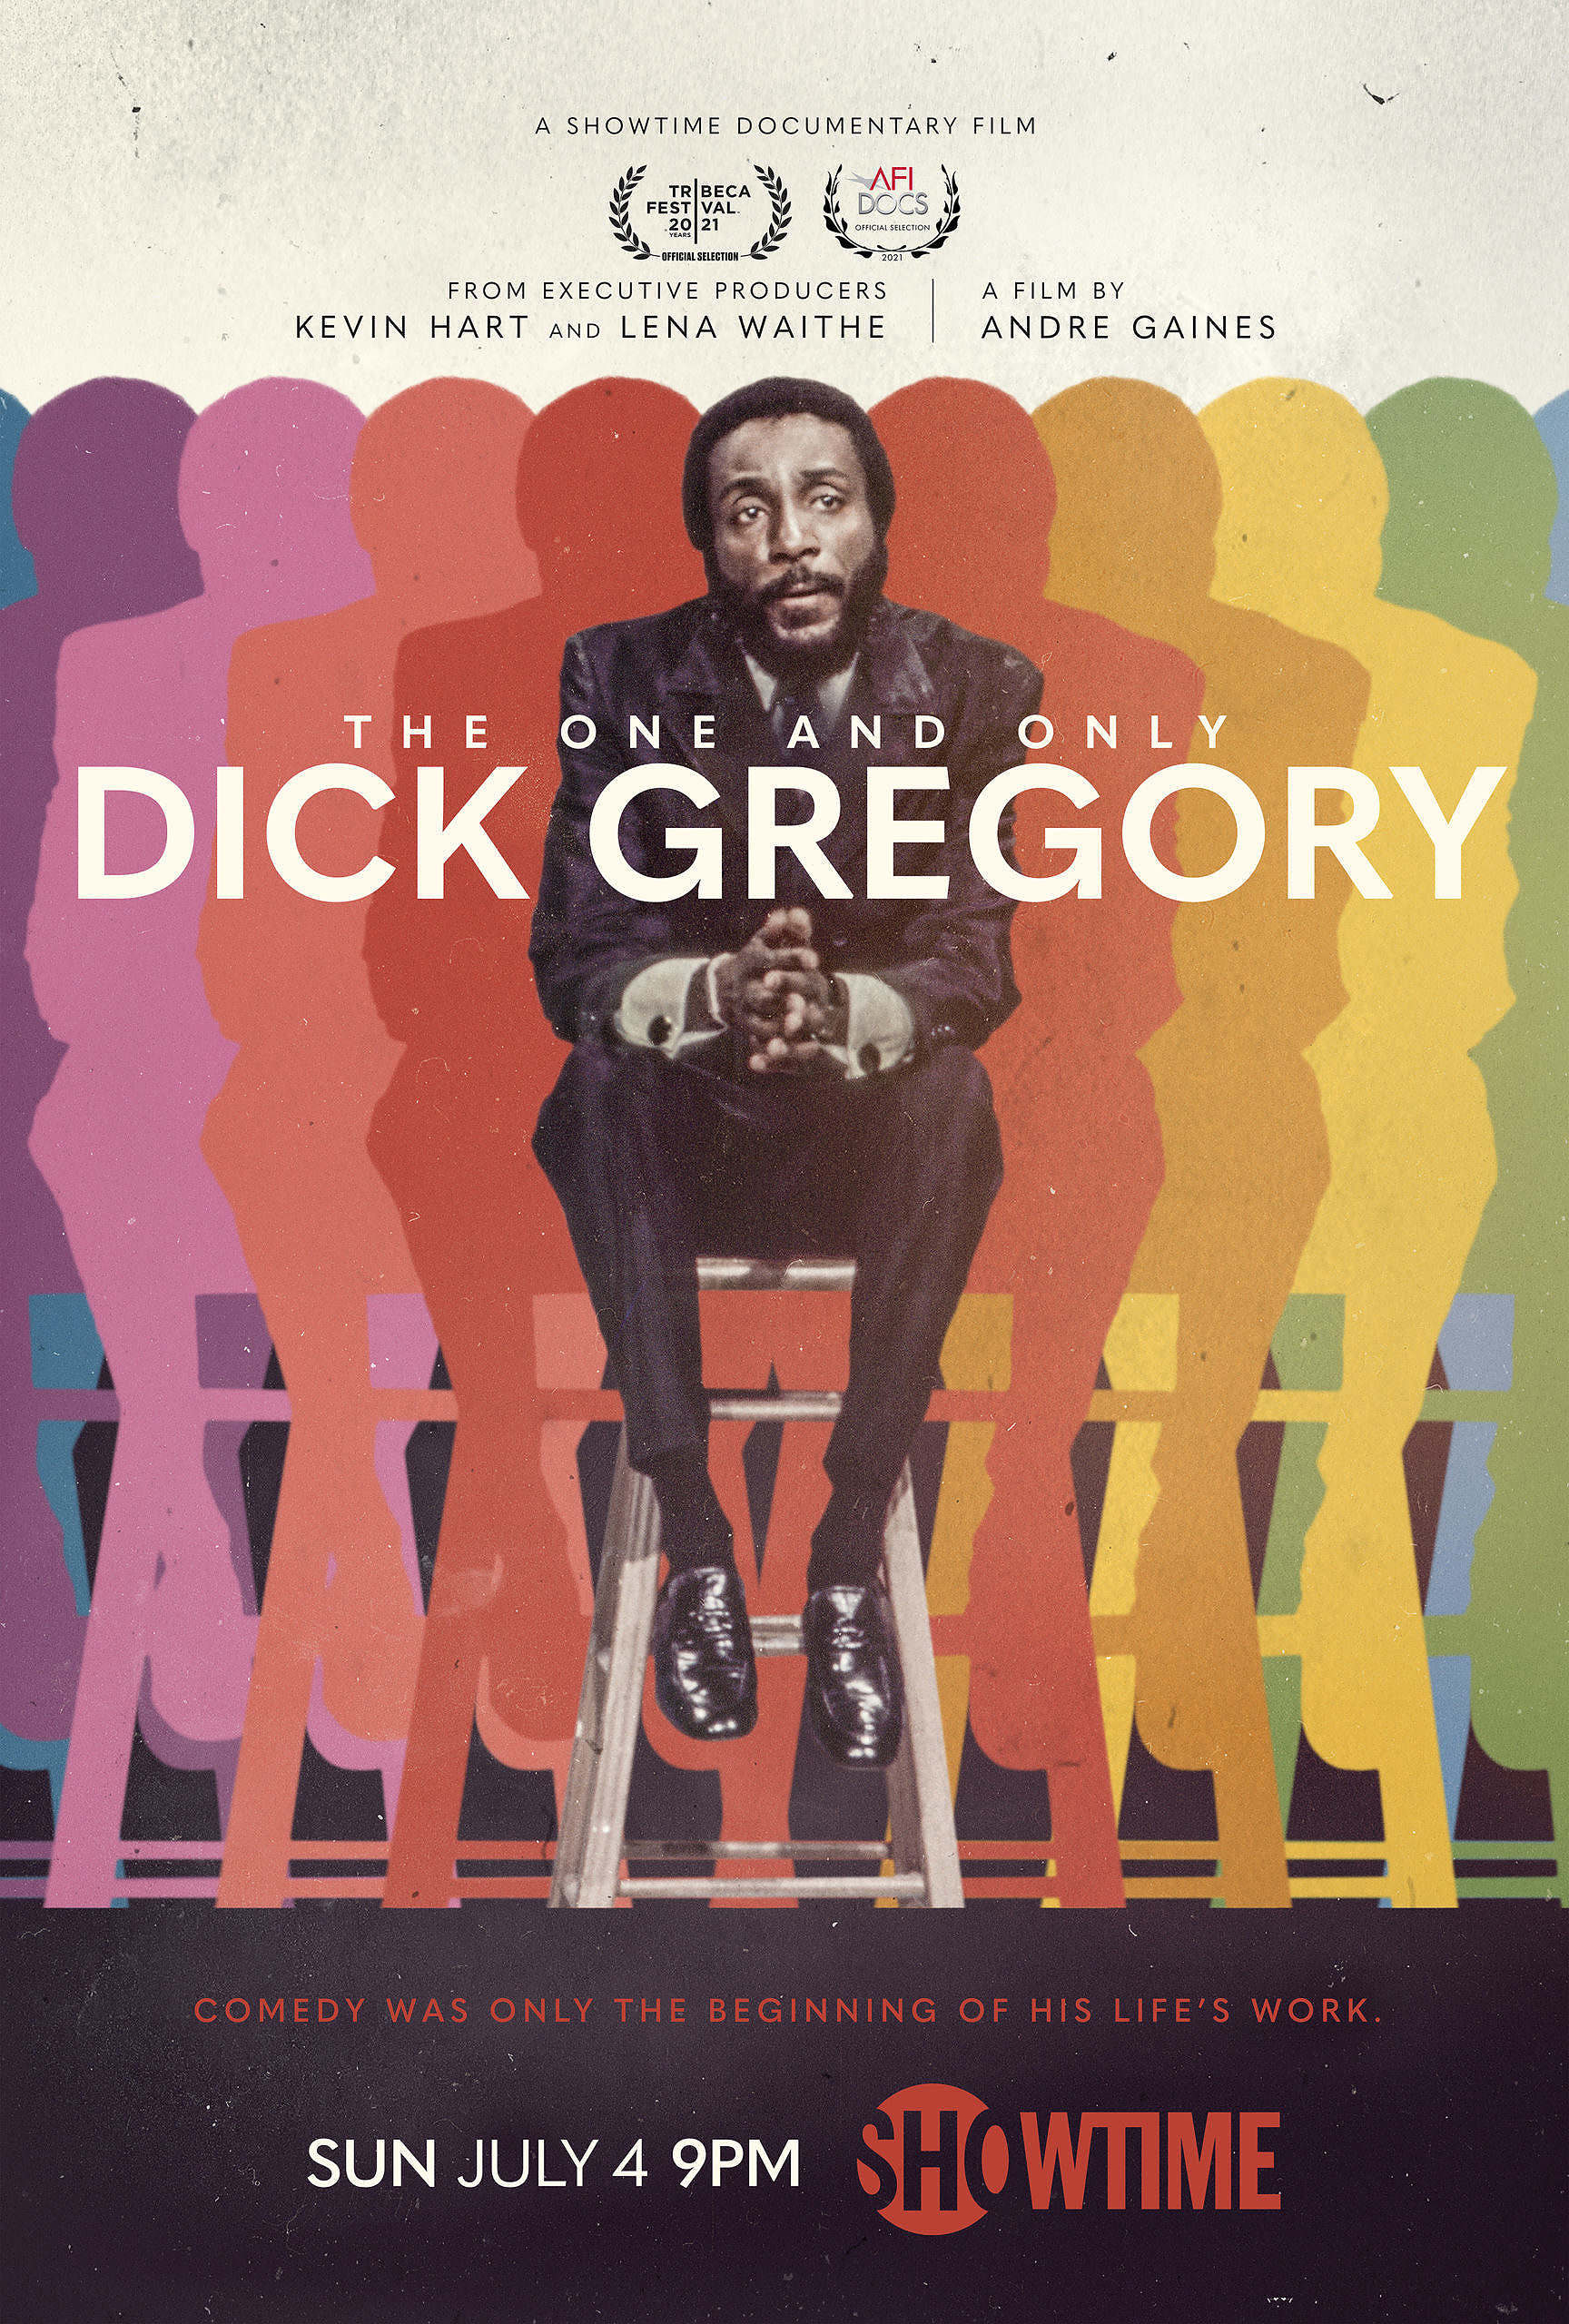 1st Trailer For Showtime Original Movie ‘The One And Only Dick Gregory’